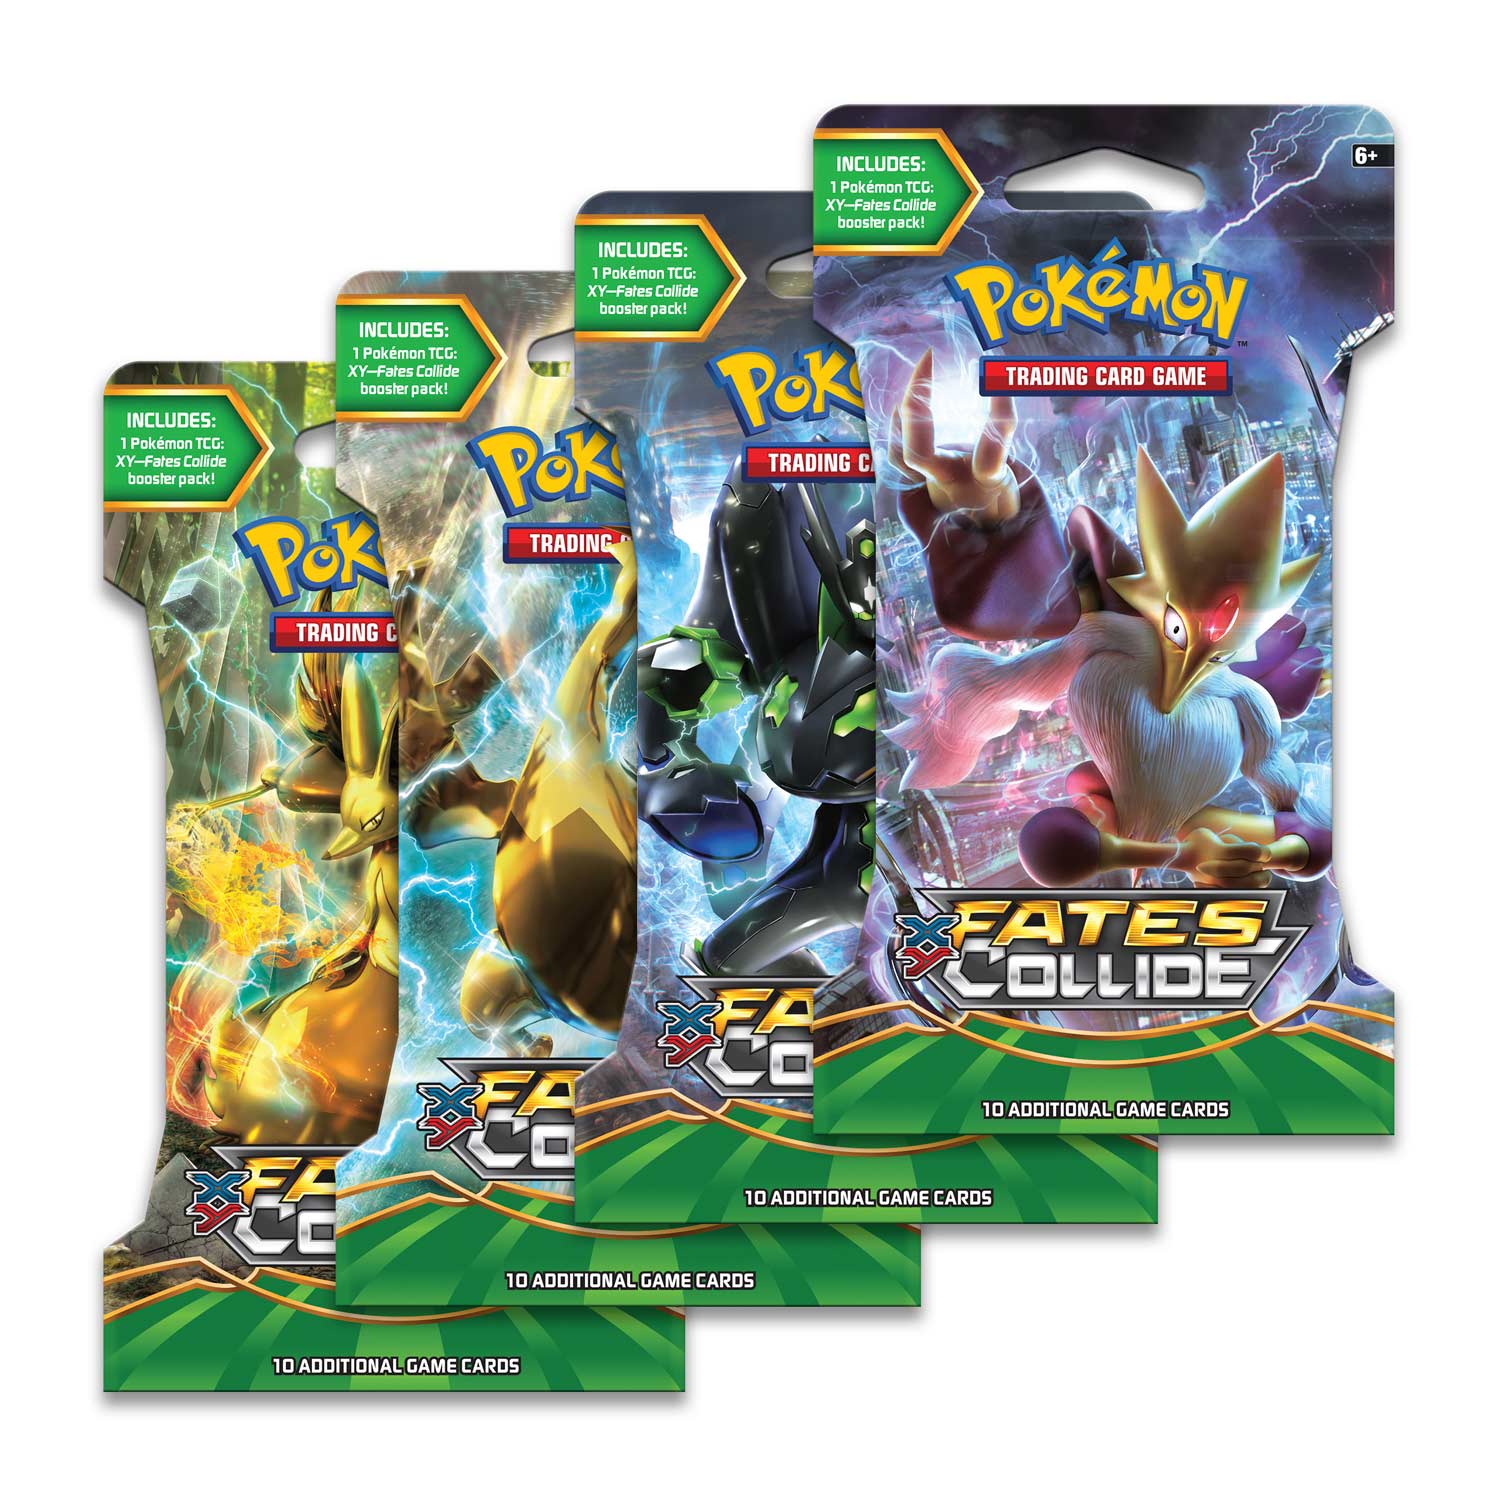 Pokémon TCG | XY—Fates Collide expansion | sleeved booster pack | trading card game